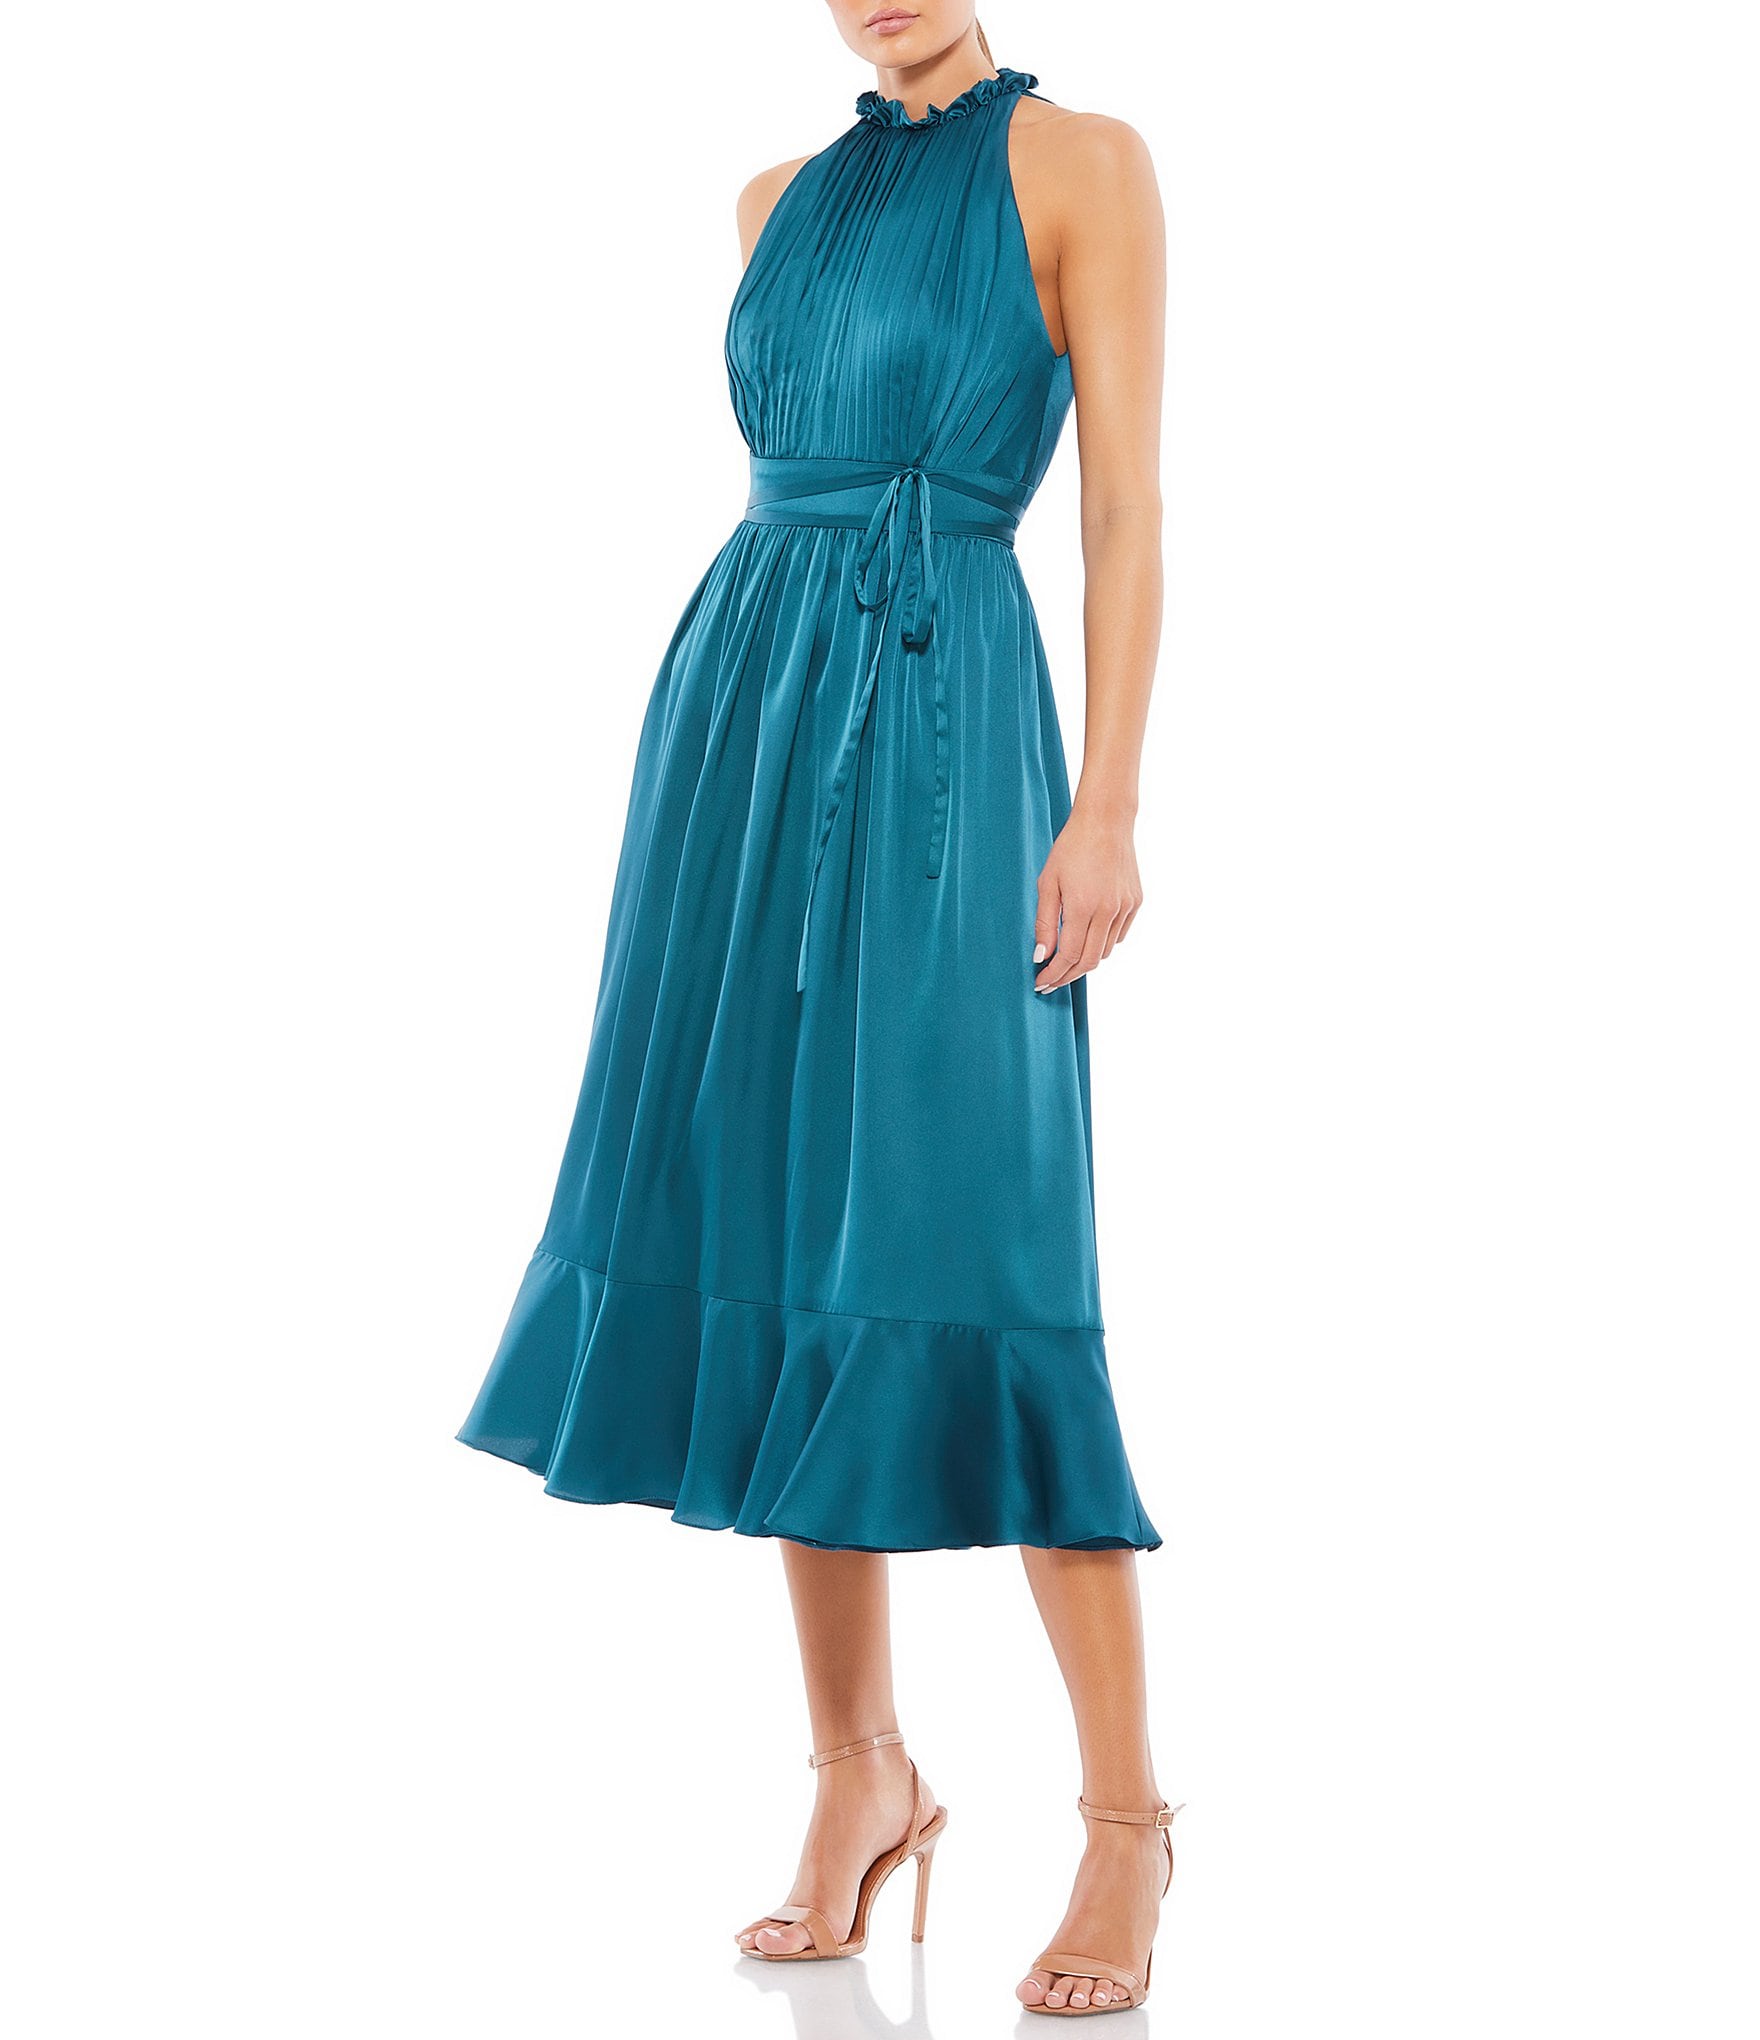 pleated: Women's Cocktail & Party Dresses | Dillard's